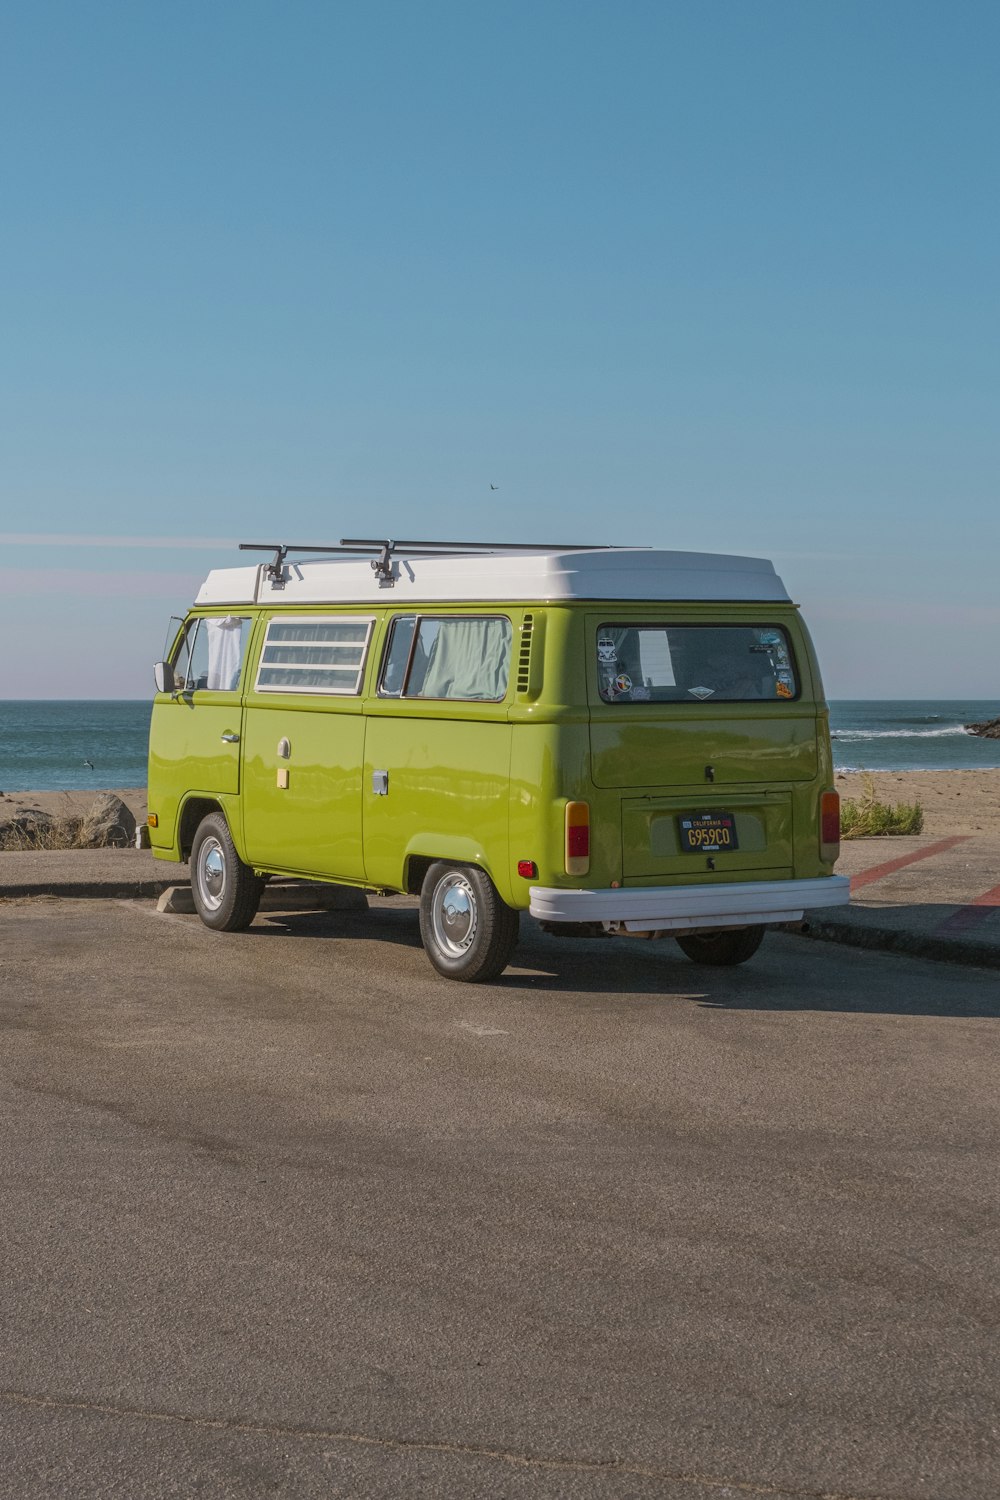 green volkswagen t-2 on brown soil near body of water during daytime